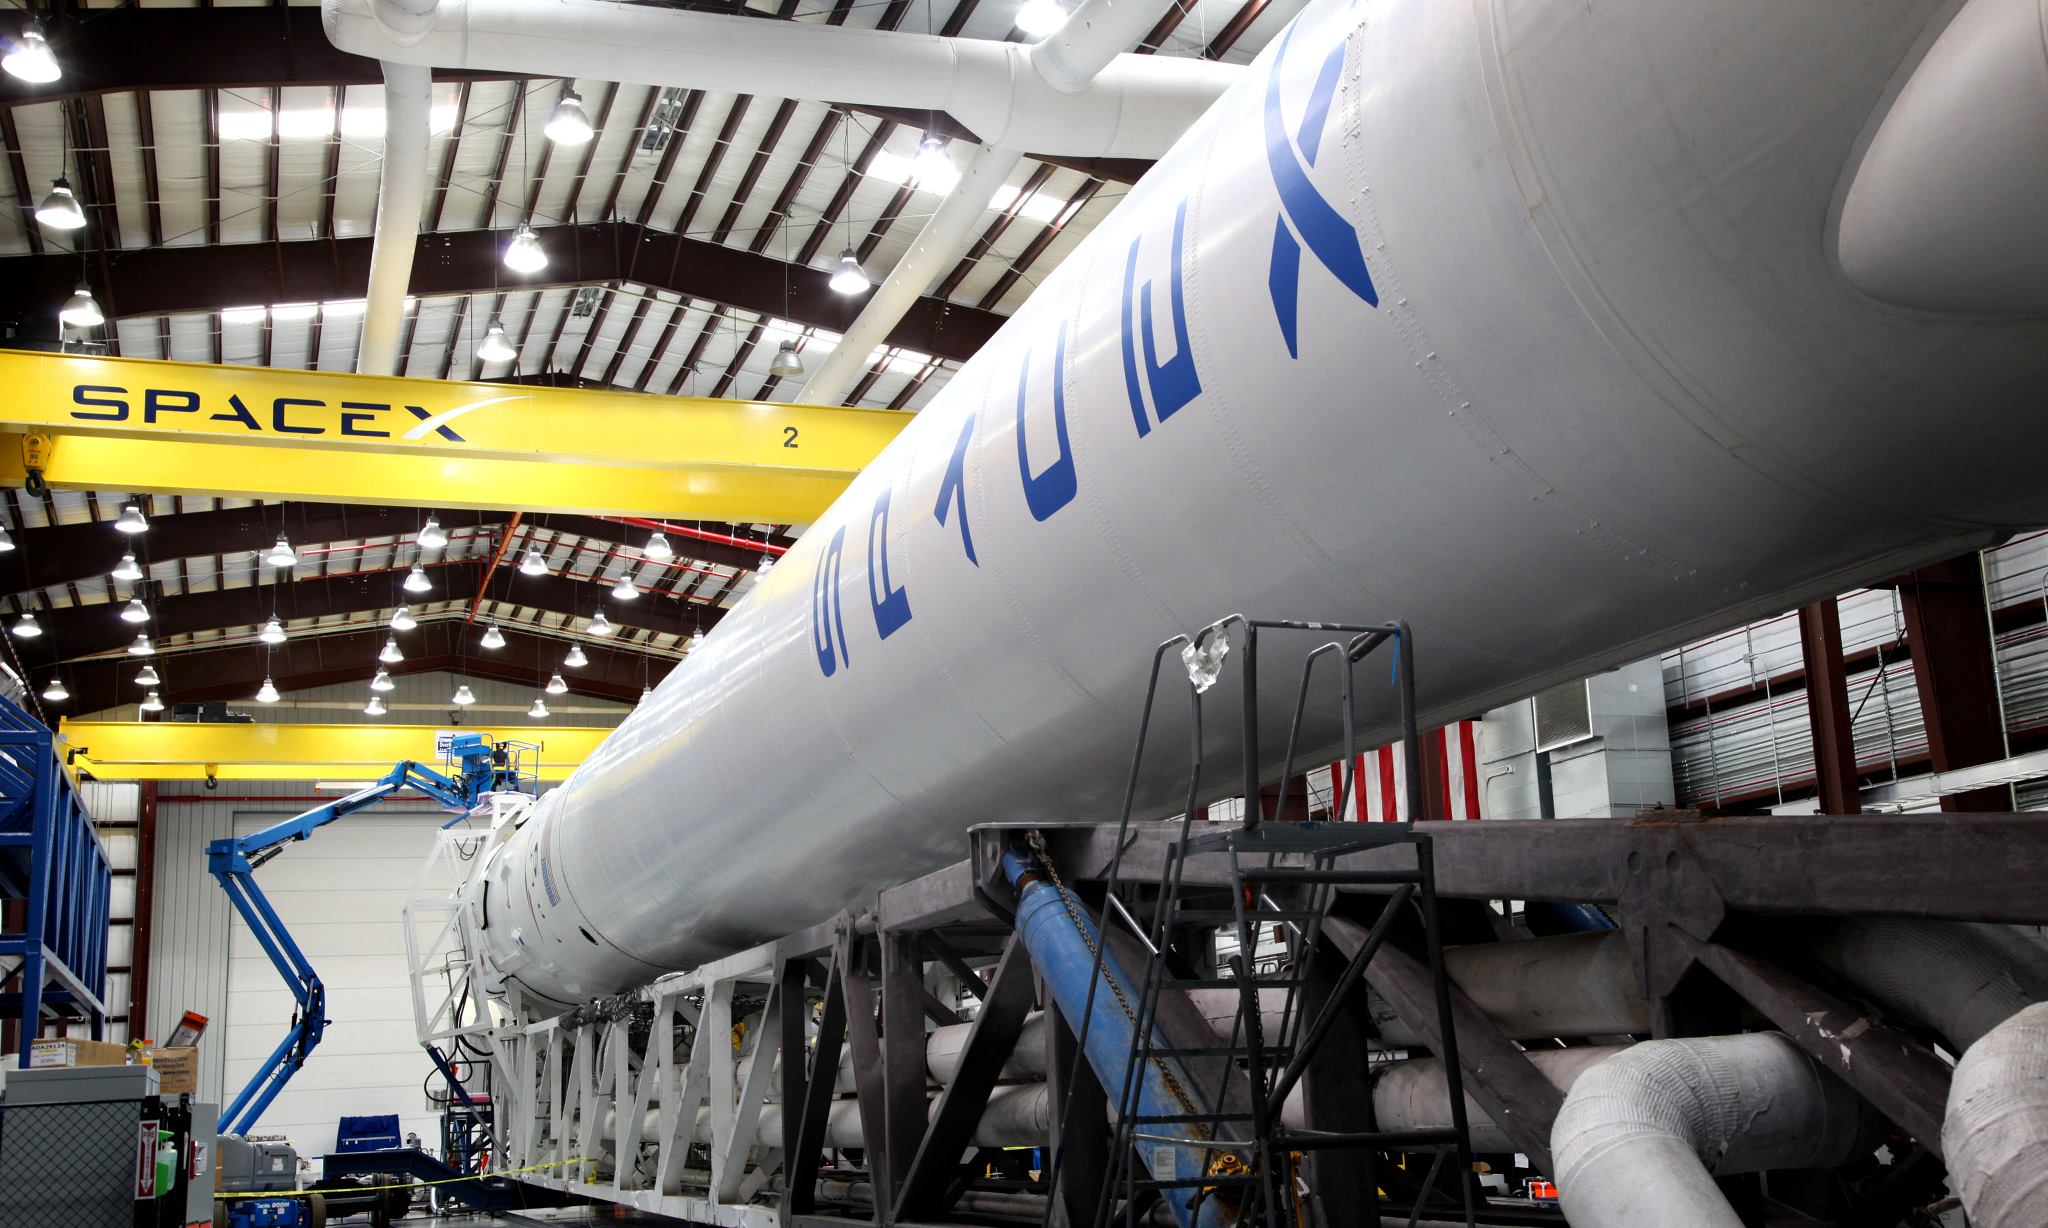 SpaceX photo of Falcon 9 rocket SLC 40 Cape Canaveral posted on AmericaSpace